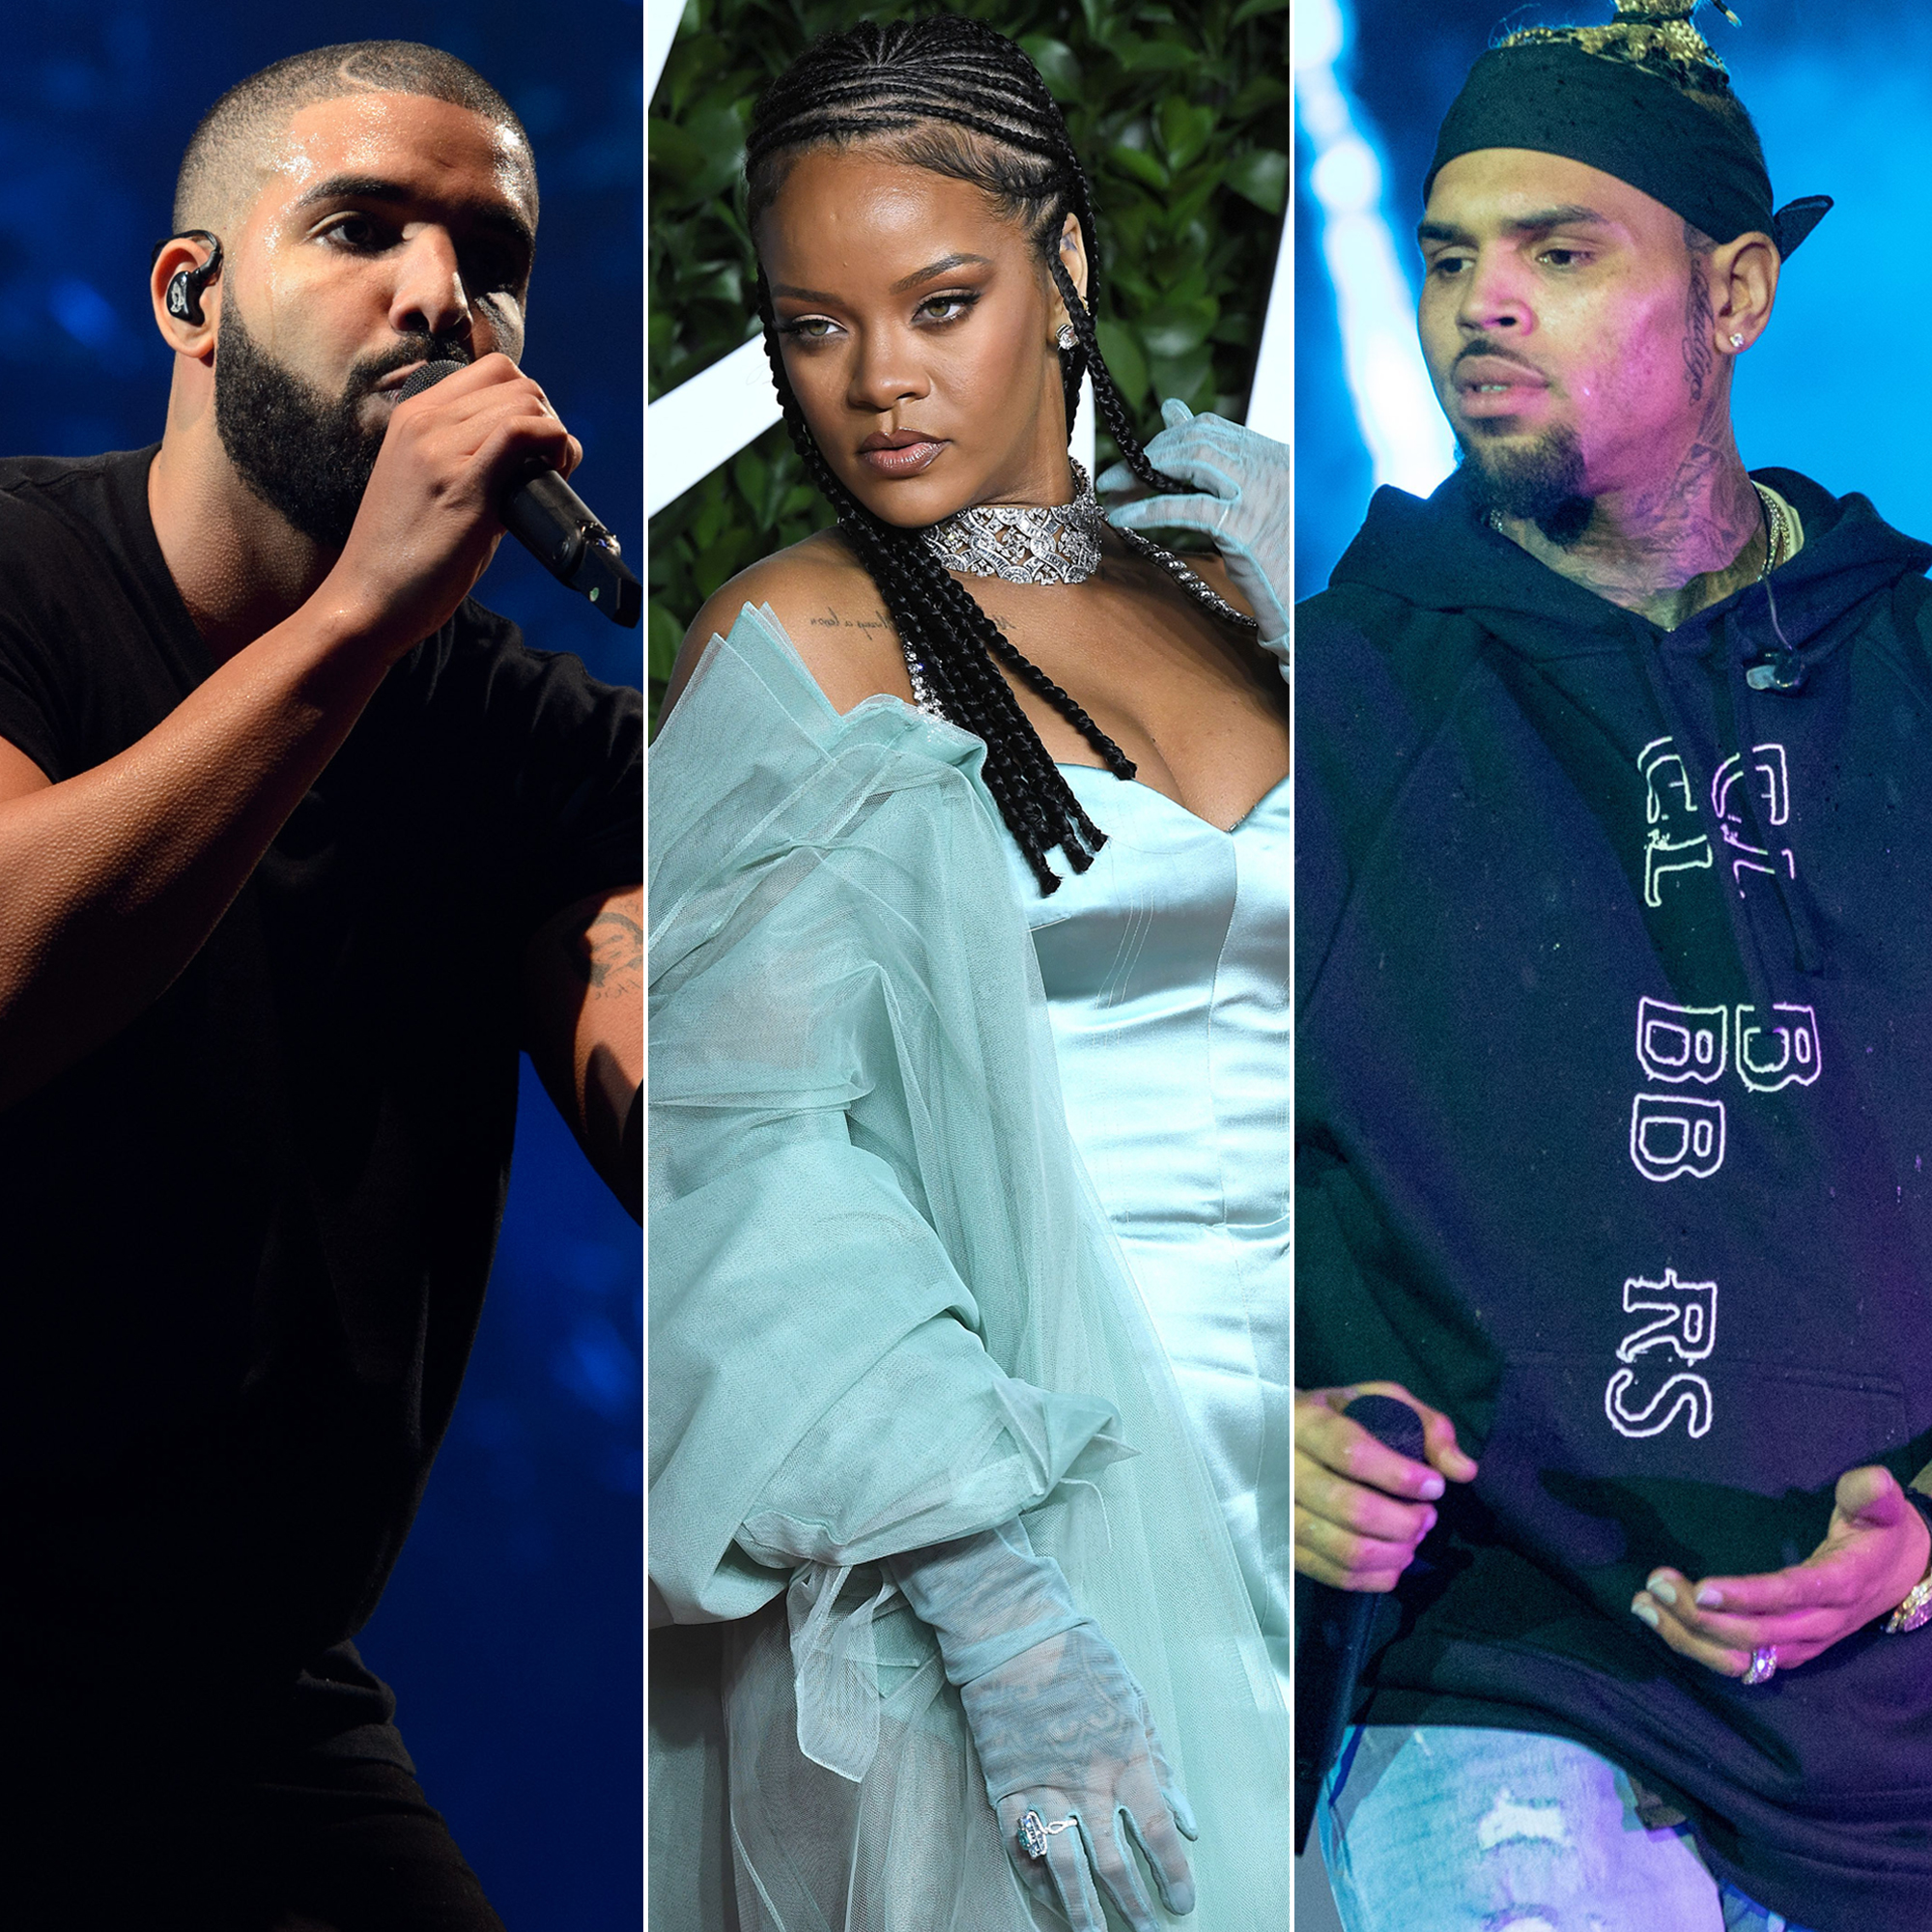 Rihanna And Chris Brown - Drake Didn't Want to Disrespect Rihanna by Working With Chris Brown